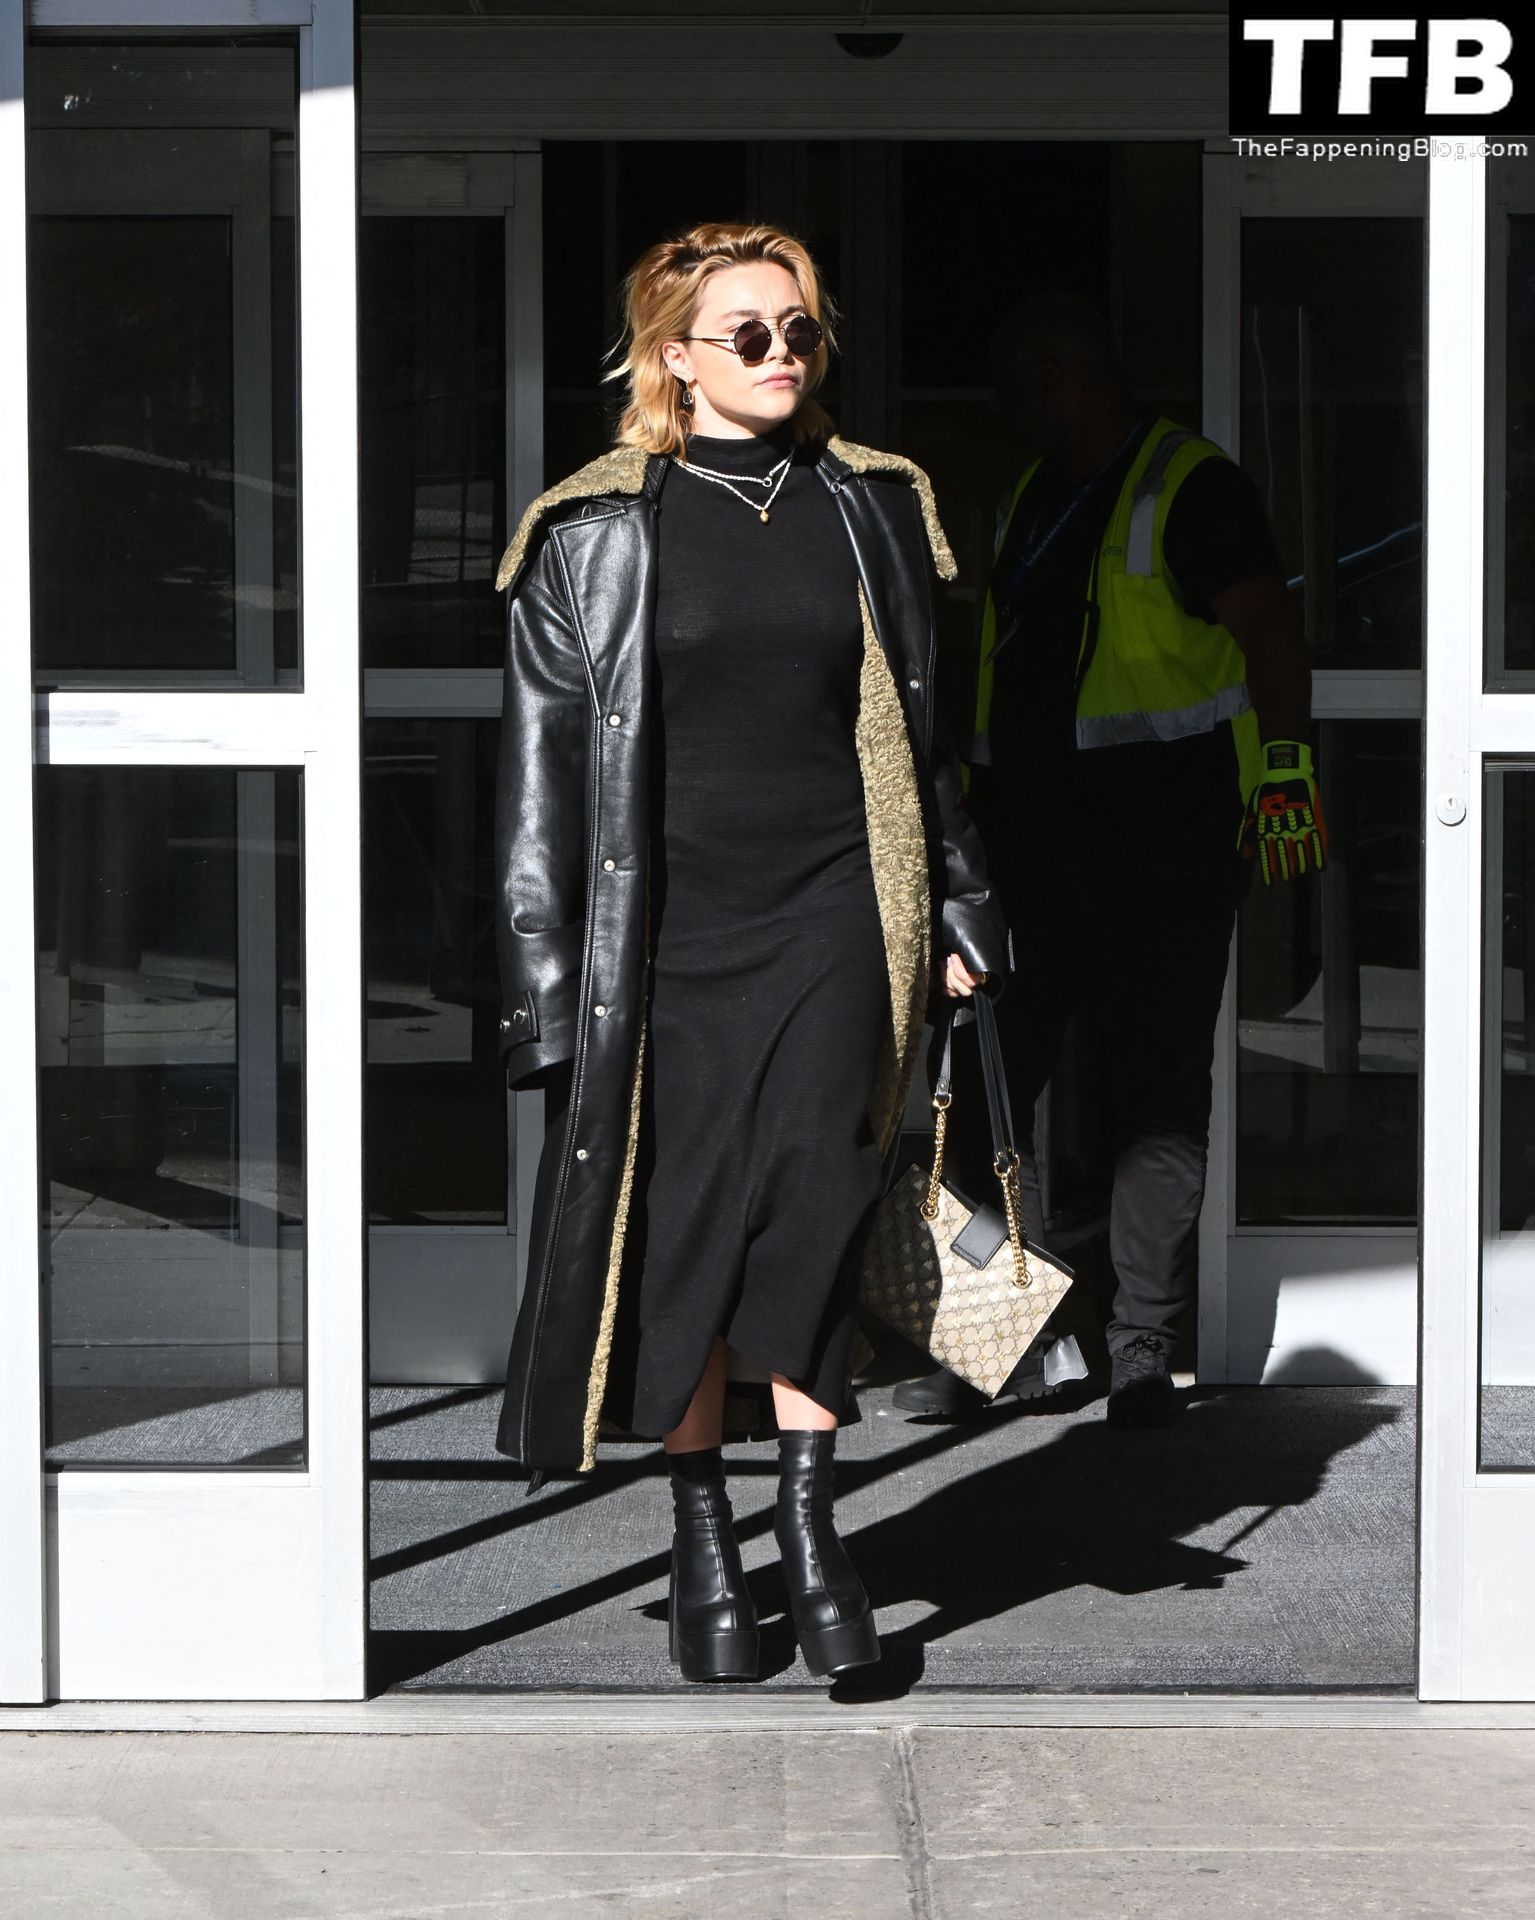 Florence Pugh Pokies The Fappening Blog 16 - Florence Pugh Shows Off Her Pokies at JFK airport in NYC (31 Photos)